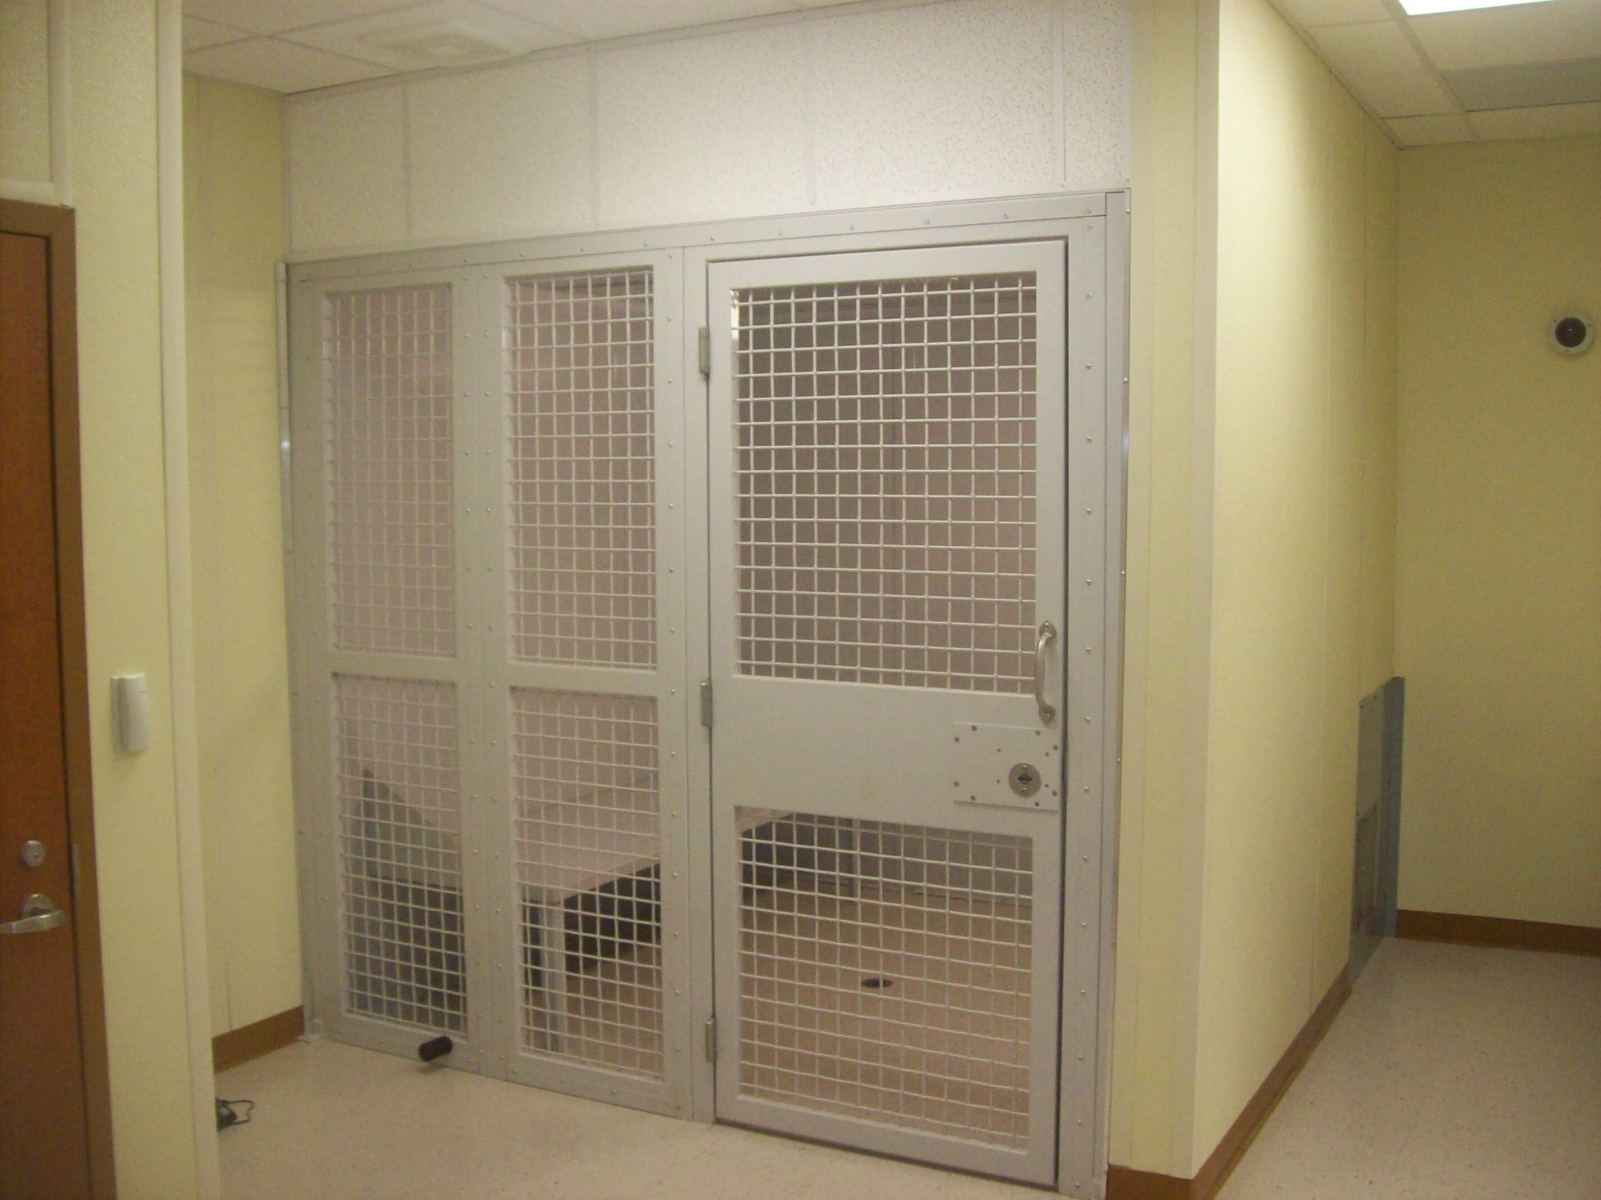 Modular-State-Police-Station-Interior-Holding-Cell